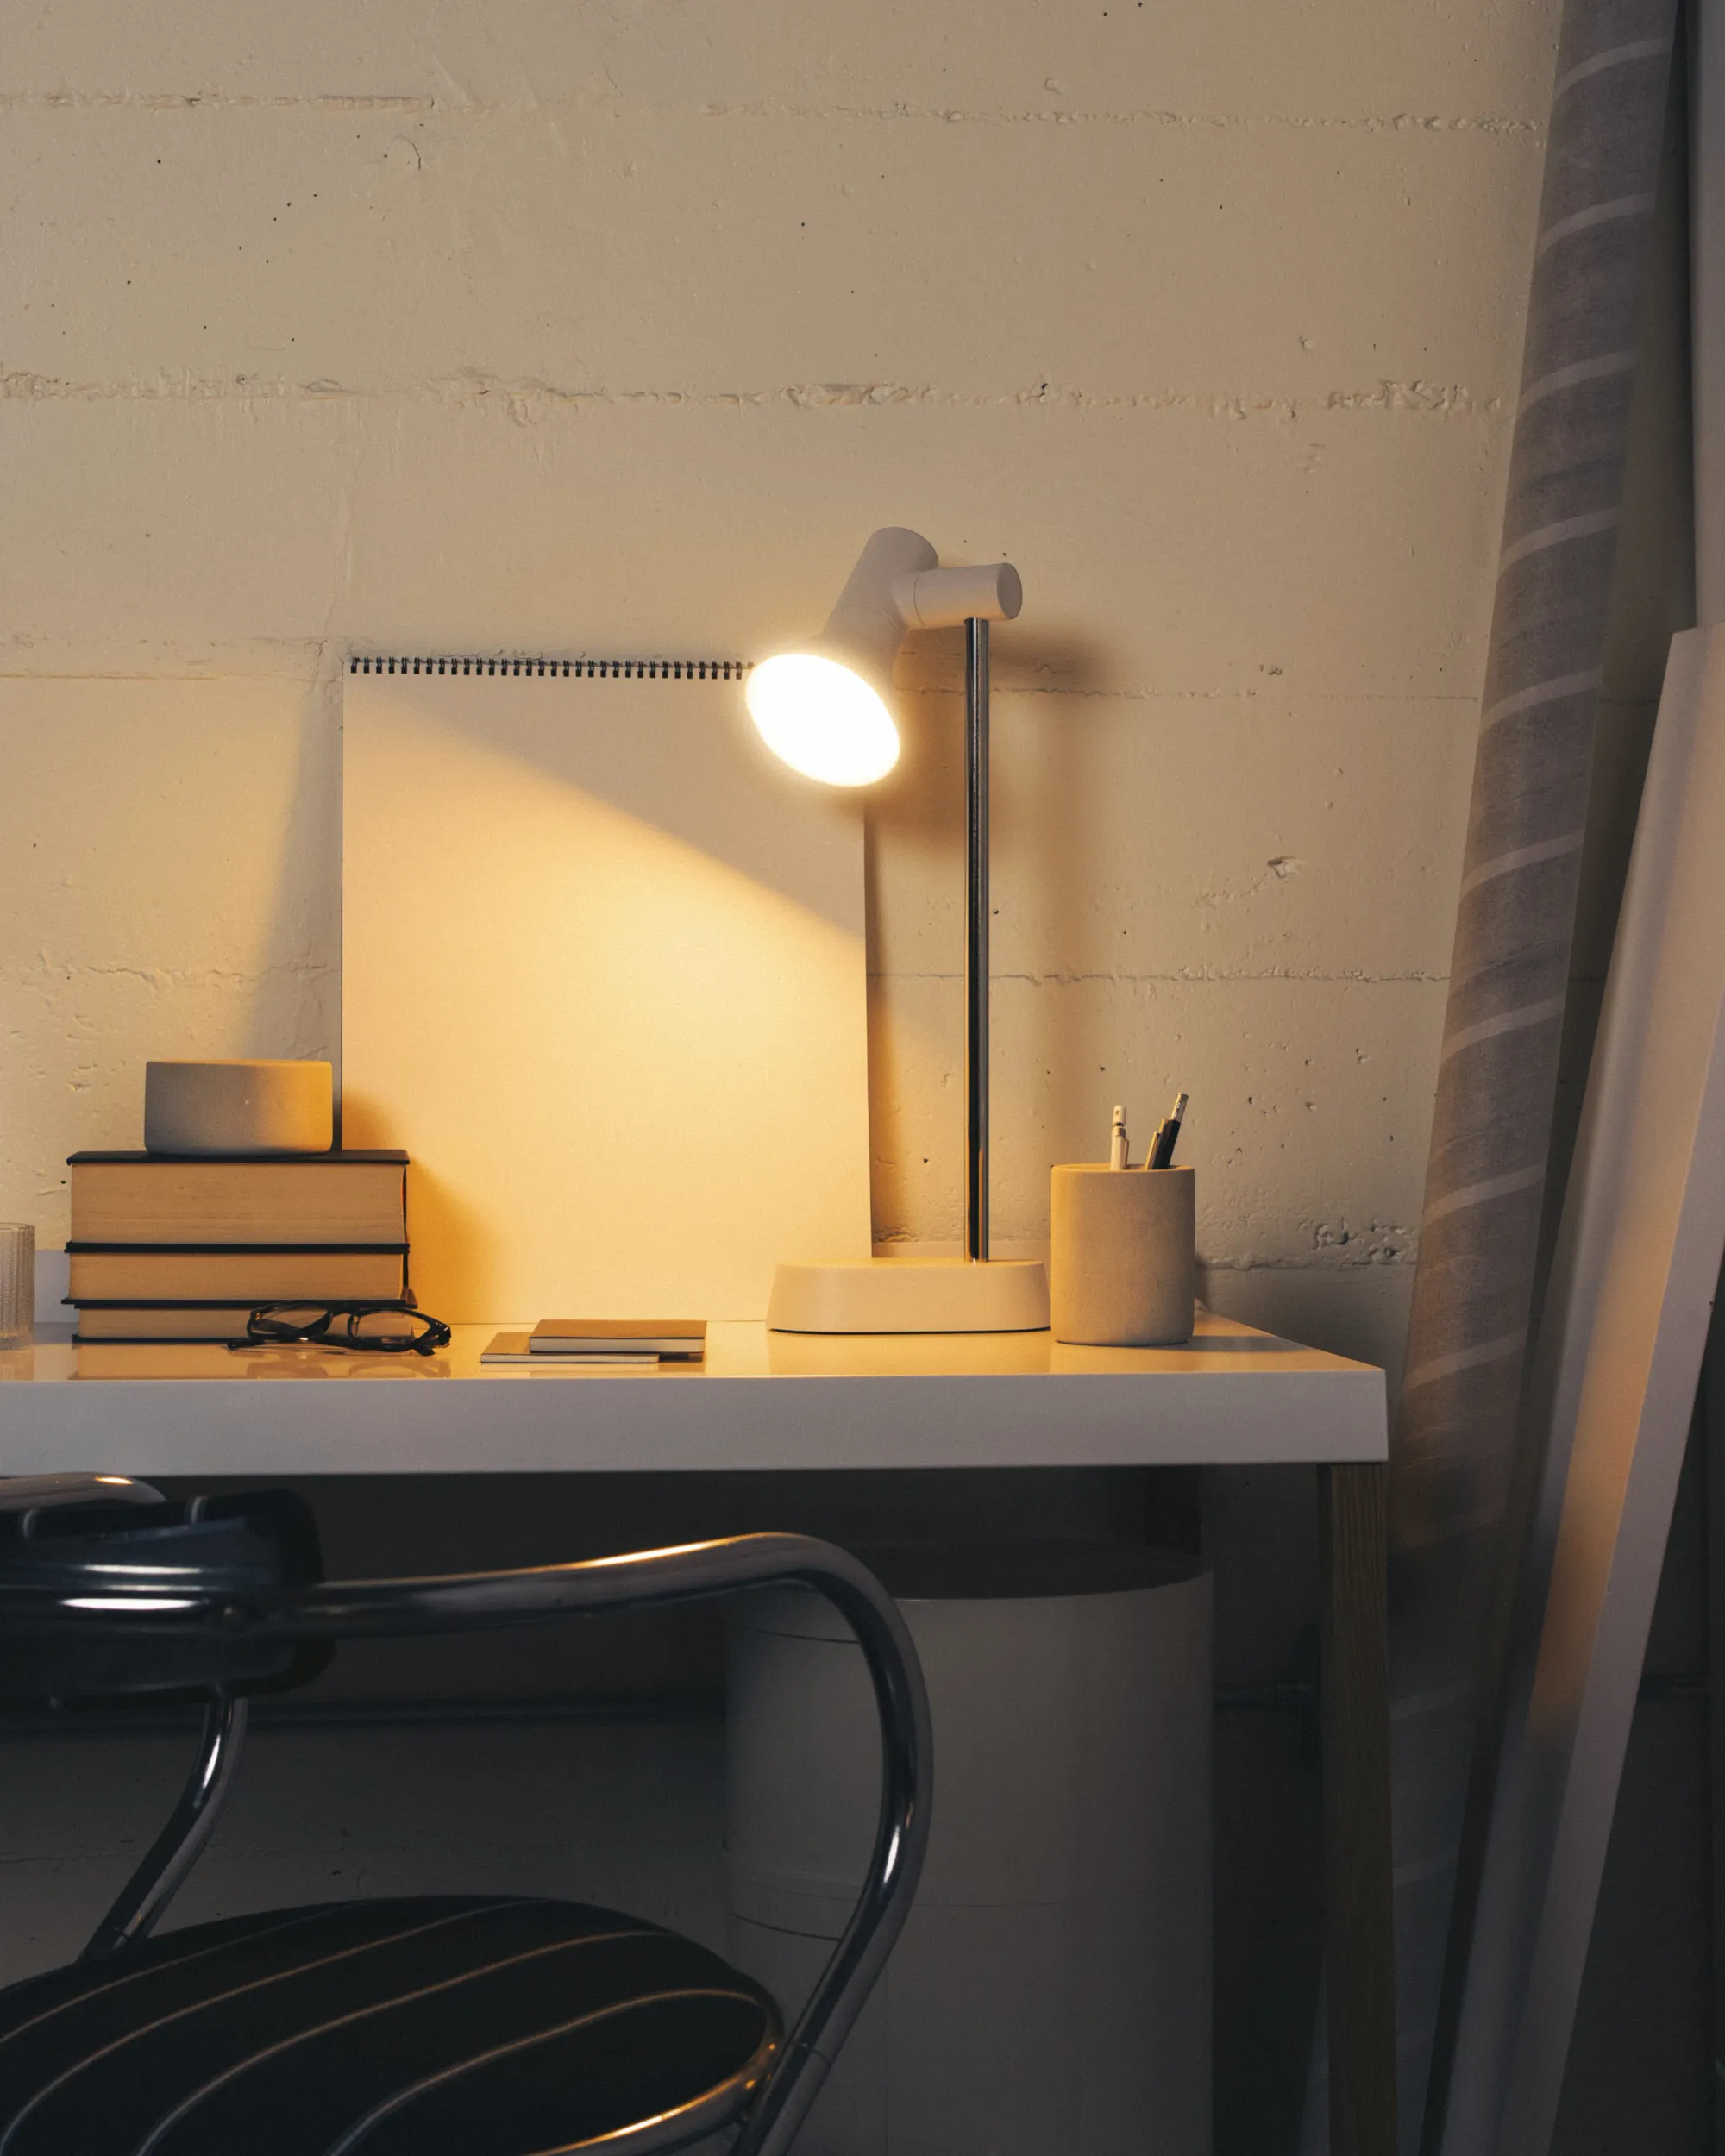 A small workspace filled with books, glasses, and writing materials are illuminated by light from an open Gantri Gallery Task Light.